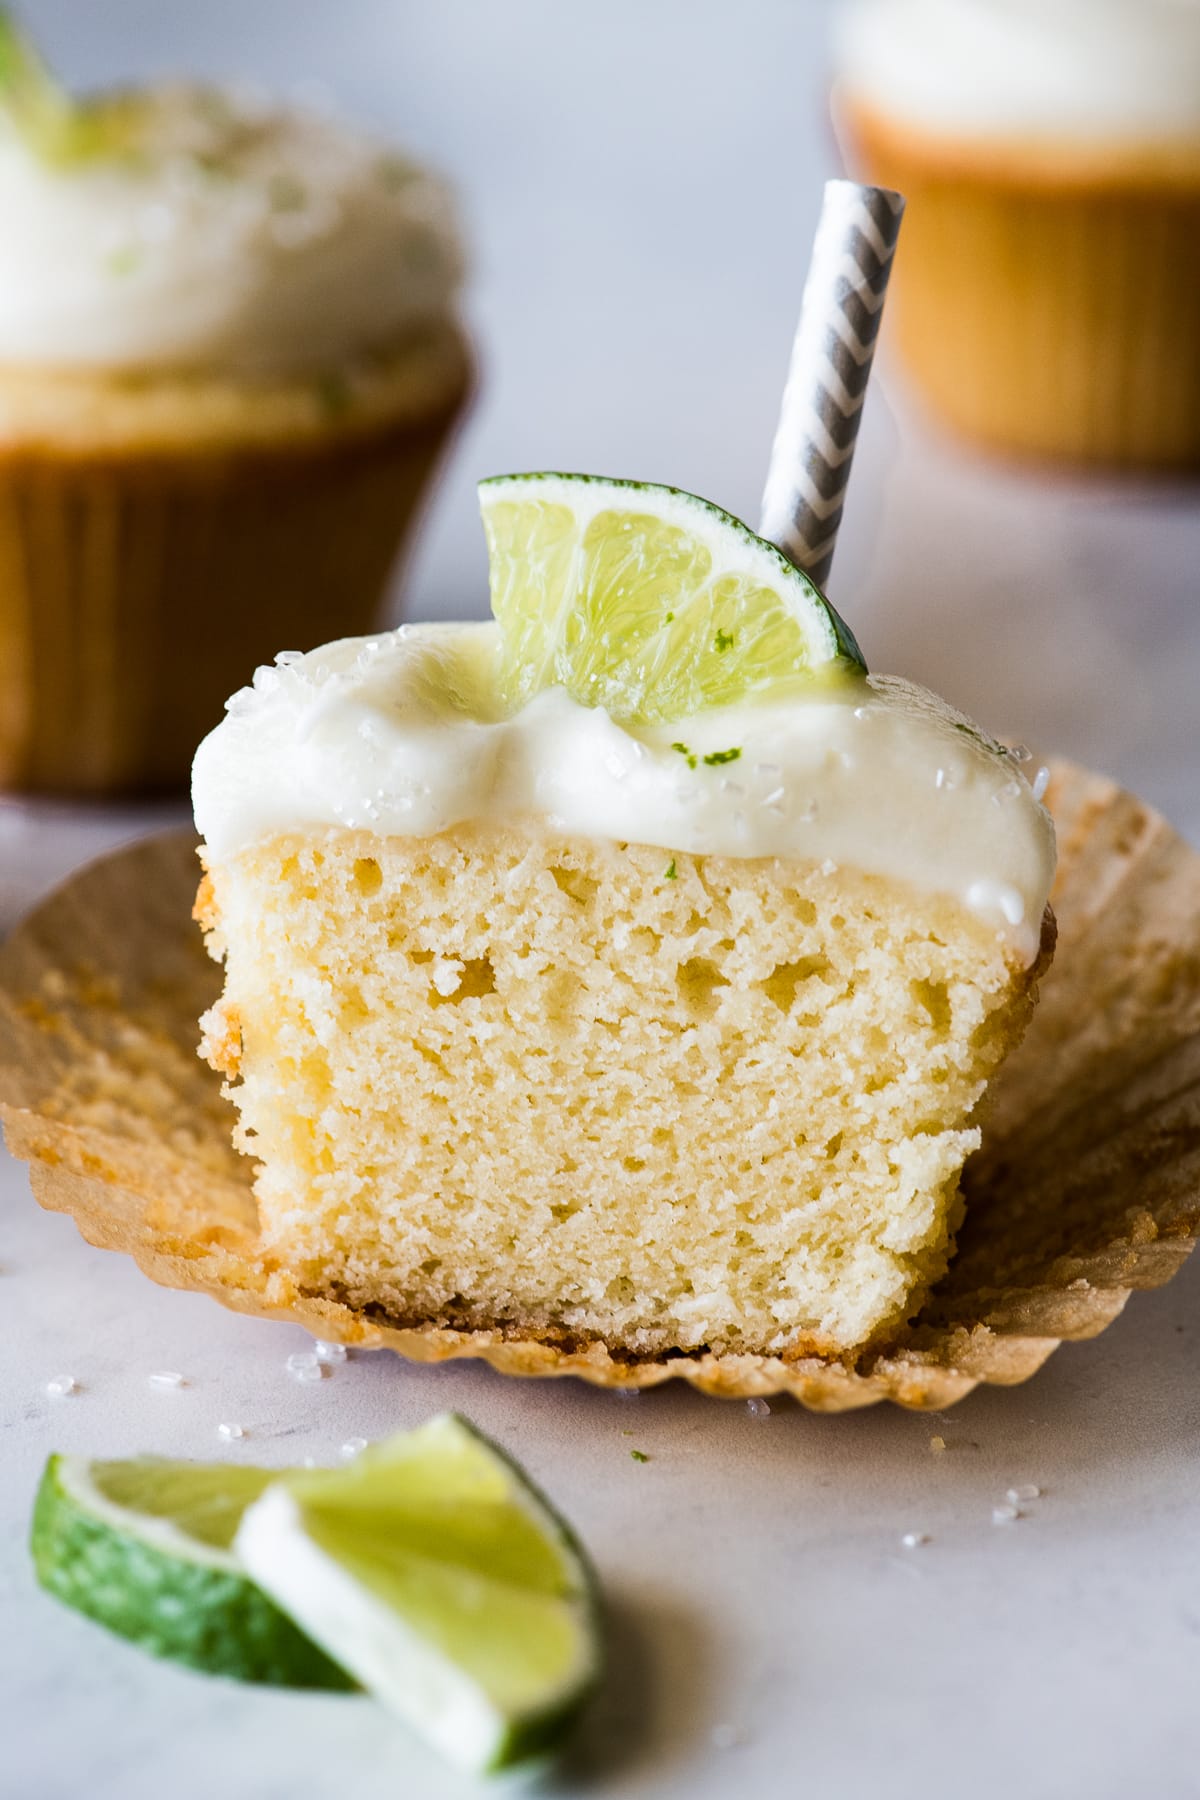 A Margarita cupcake sliced in half down the middle.